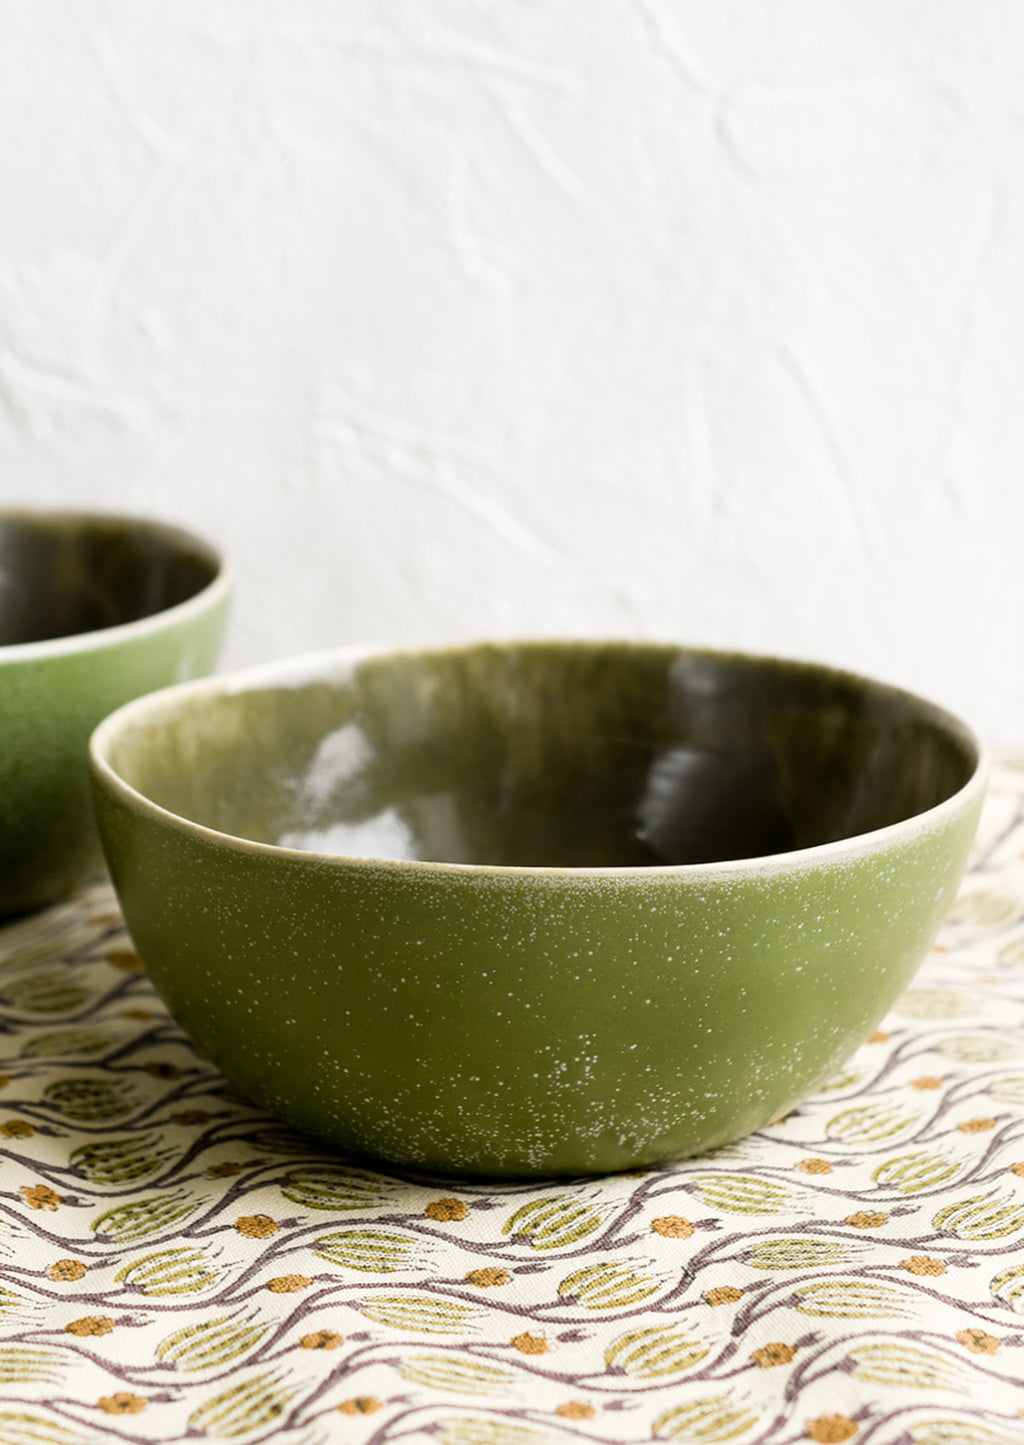 2: An olive green ceramic bowl.